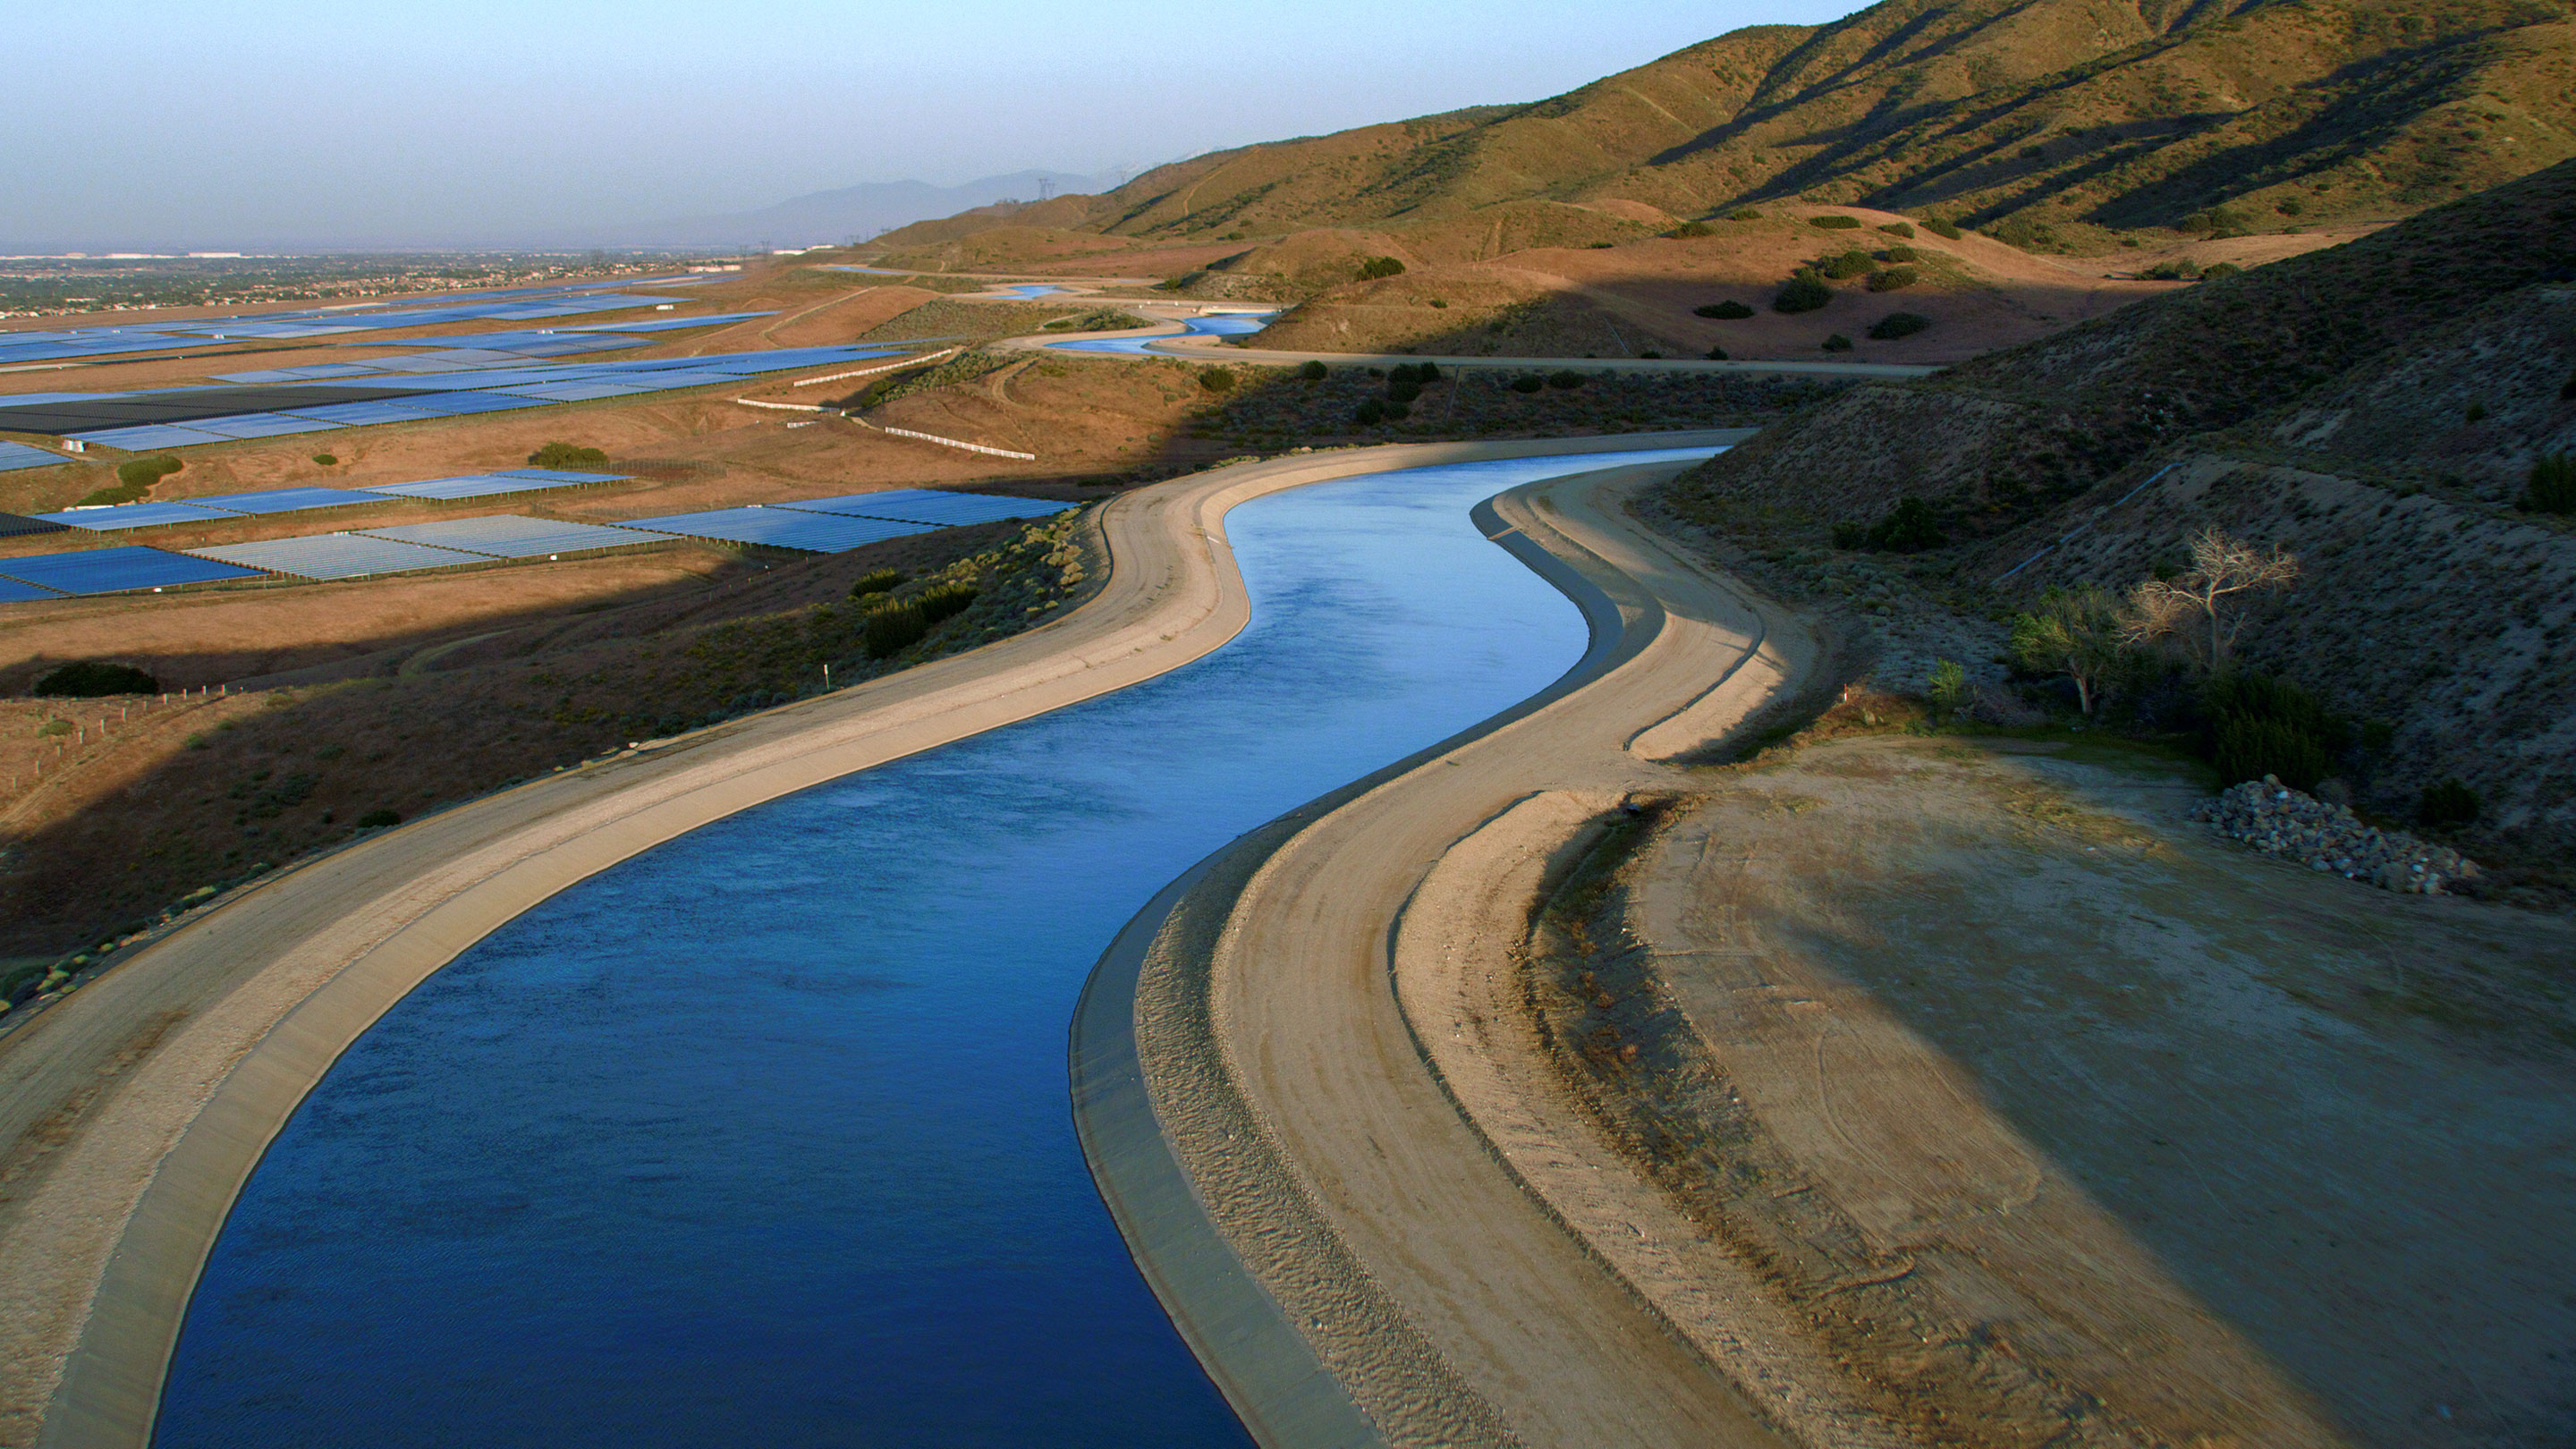 Blue water curving through a brown landscape in an aquaduct